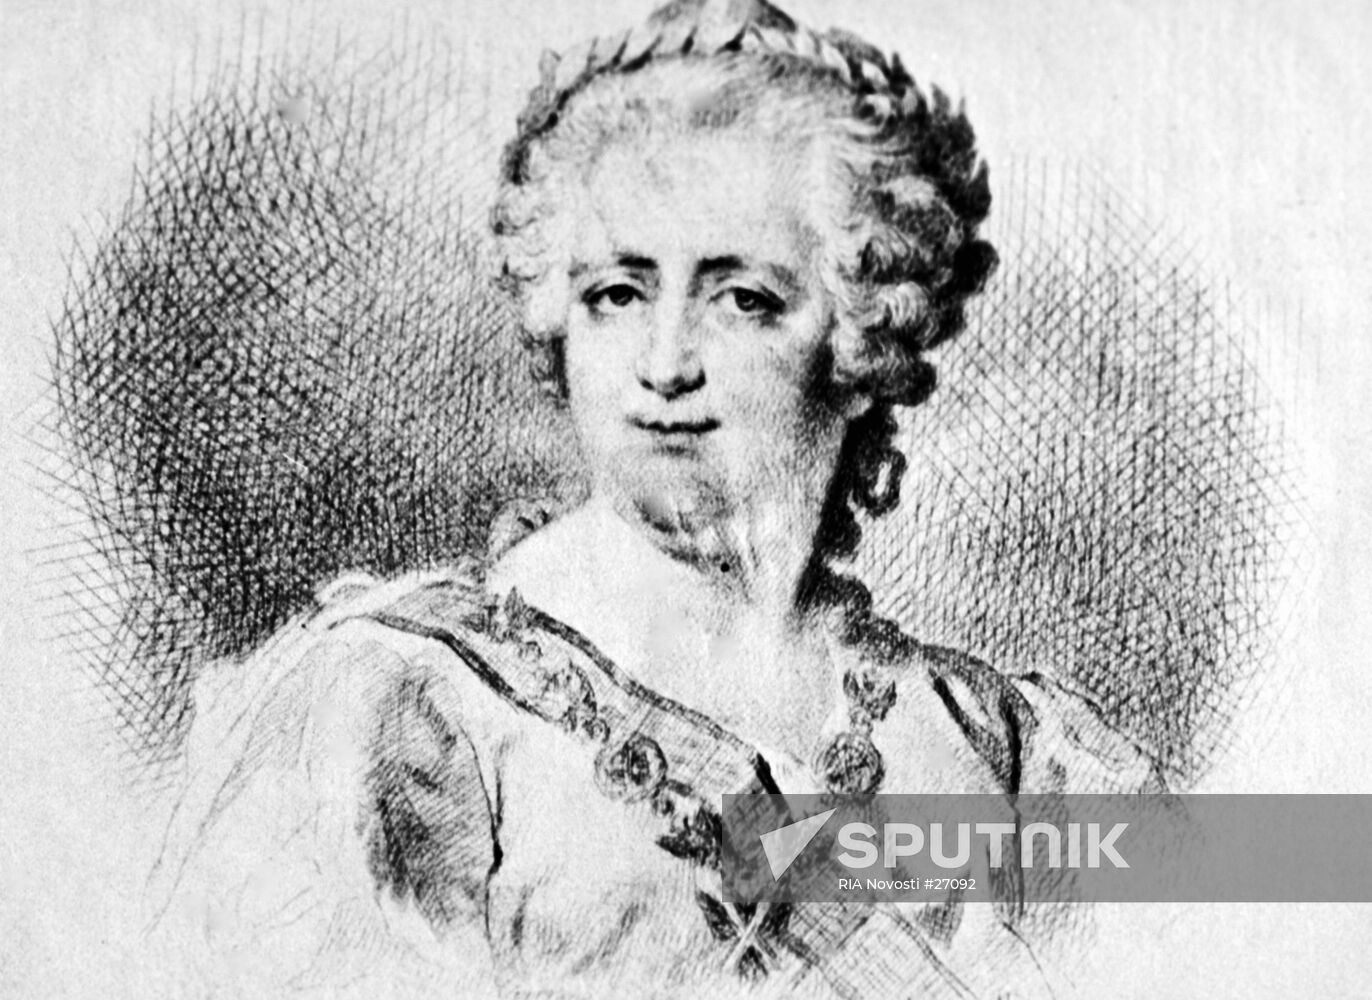 CATHERINE THE GREAT